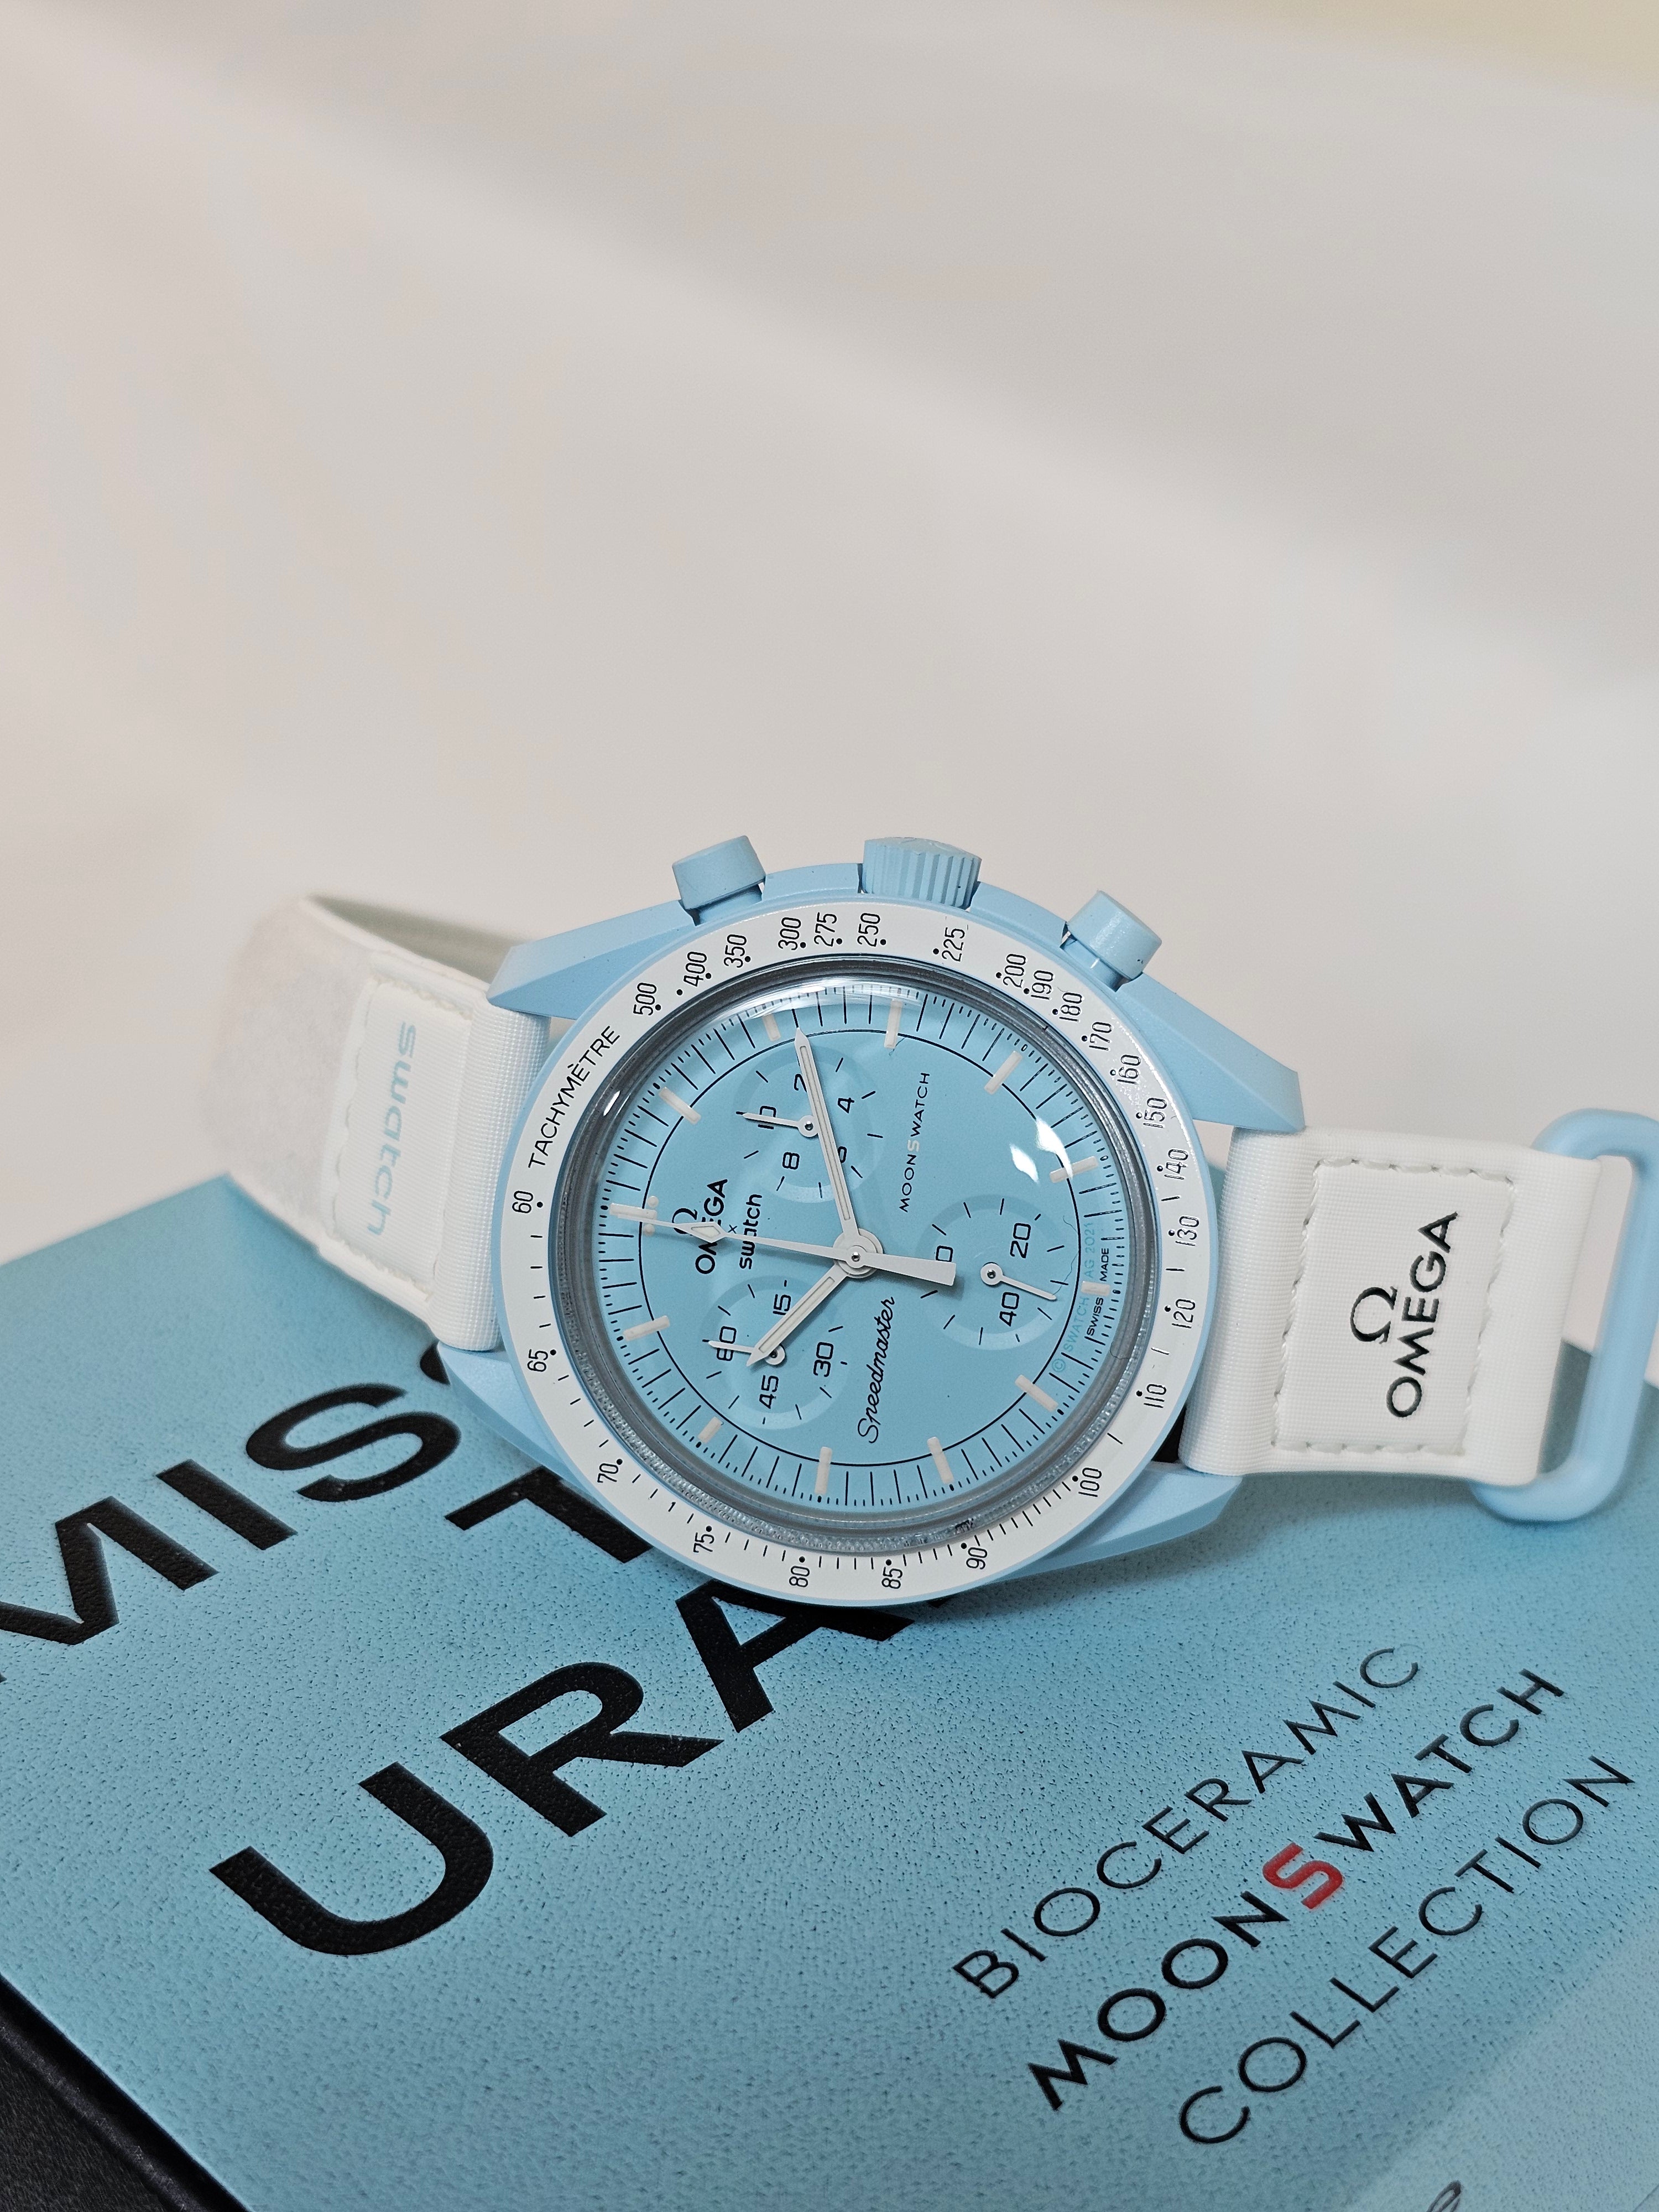 Swatch Moonswatch - Mission to Uranus: Exploring Time's Cosmic Dance